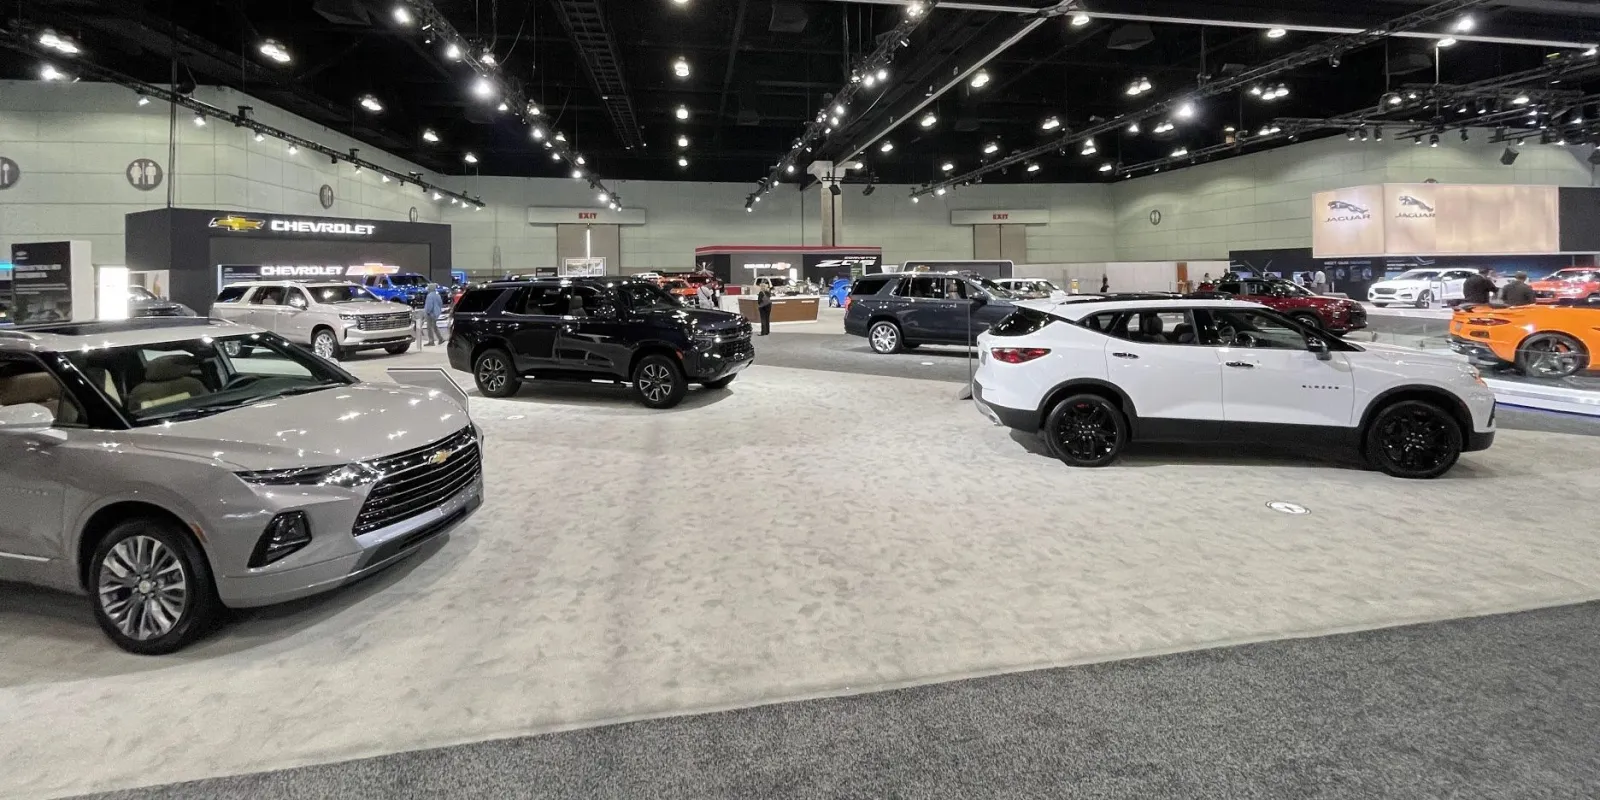 Cruise’s Apology And Key Highlights From The LA Auto Show